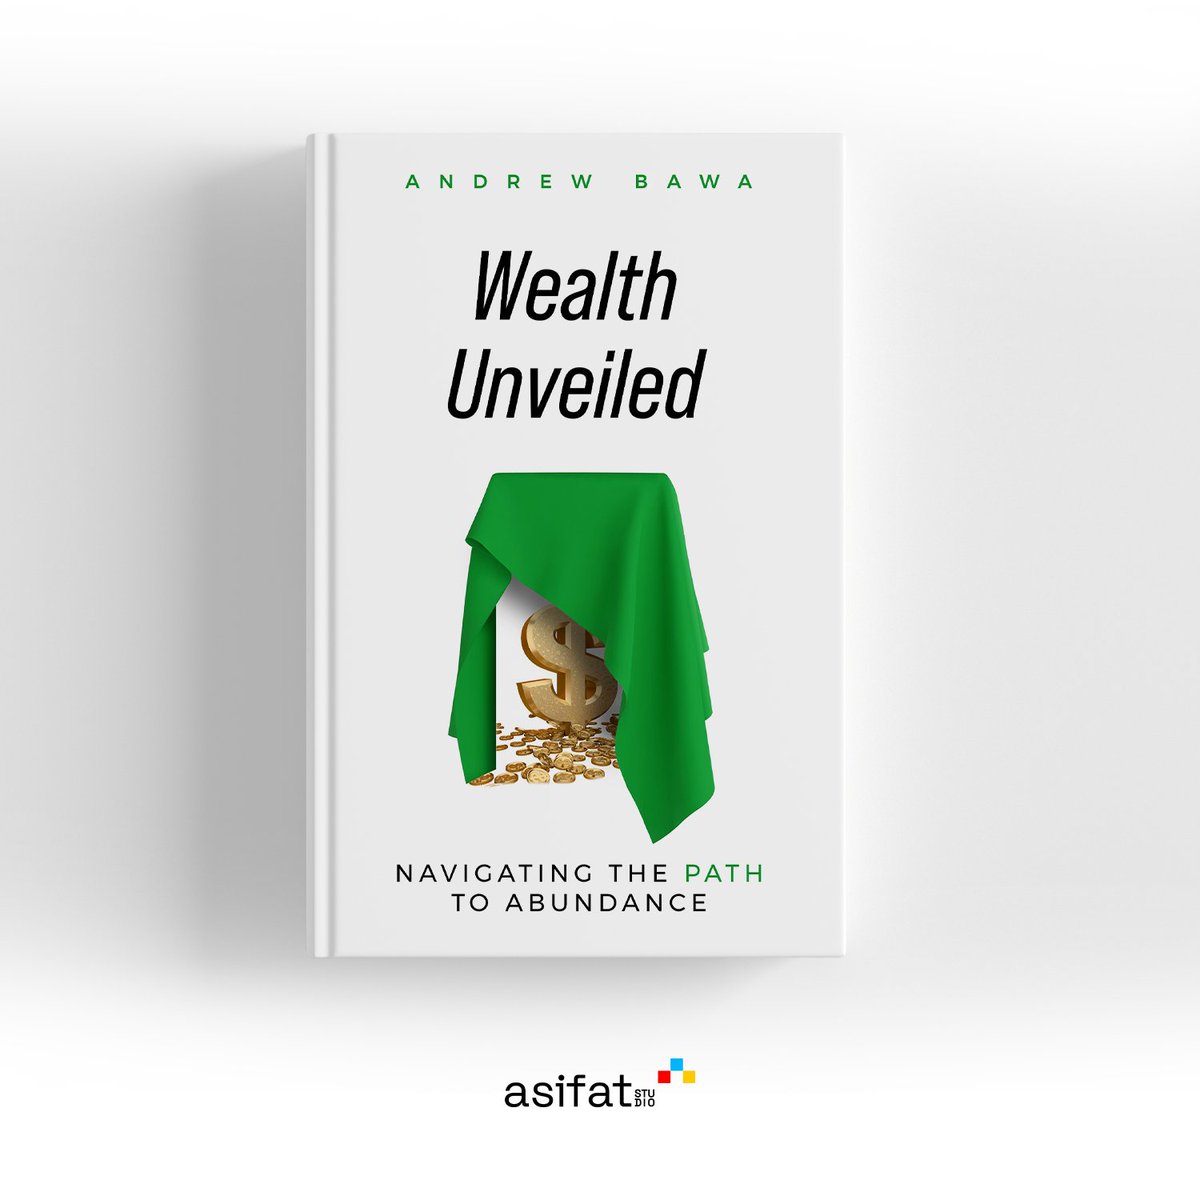 Wealth Unveiled By Andrew Bawa

 #bookcoverdesign #bookcover #WriterCommunity #bookcovers  #WritingCommunity #selfpublishing #booklover #indieauthor #premadebookcover #author #ebookcoverdesign #writersoftwitter #ebookcover #bookdesigner #ebook #selfpub #cover #asifatstudio